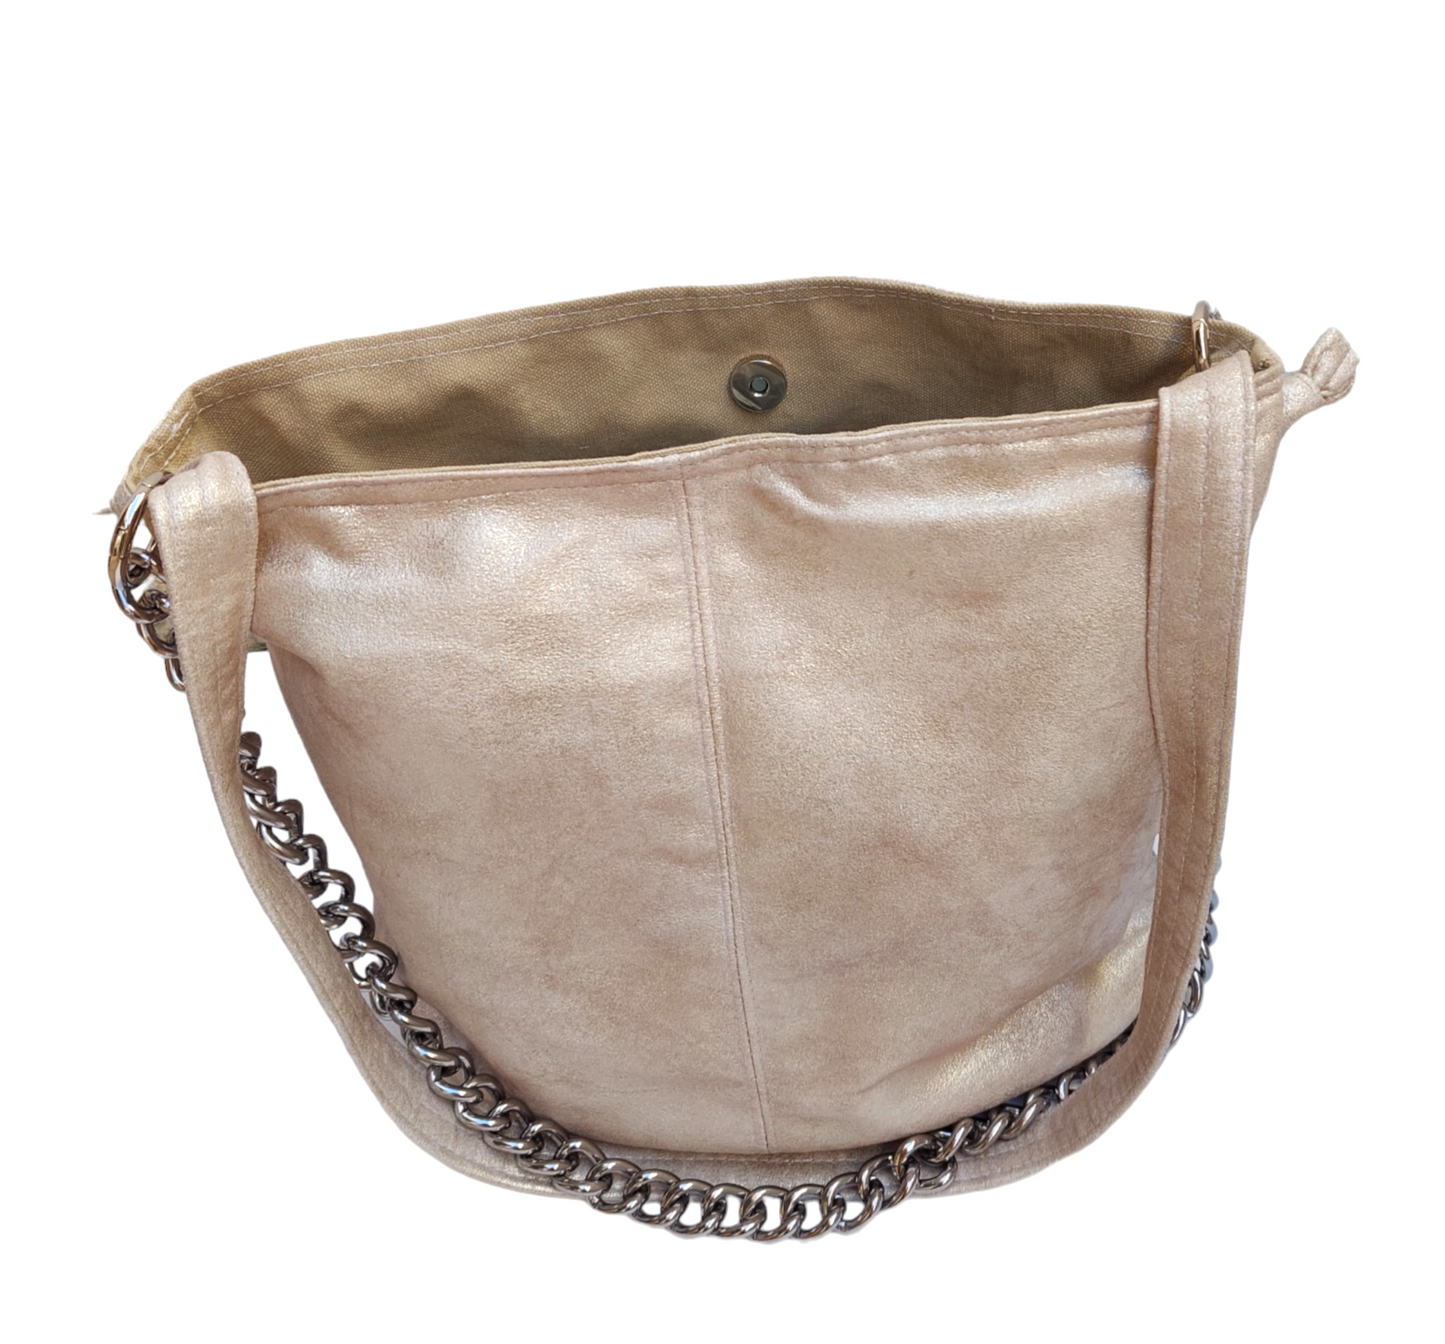 GOLD SILVER SHOULDER BAG WITH SILVER CHAIN